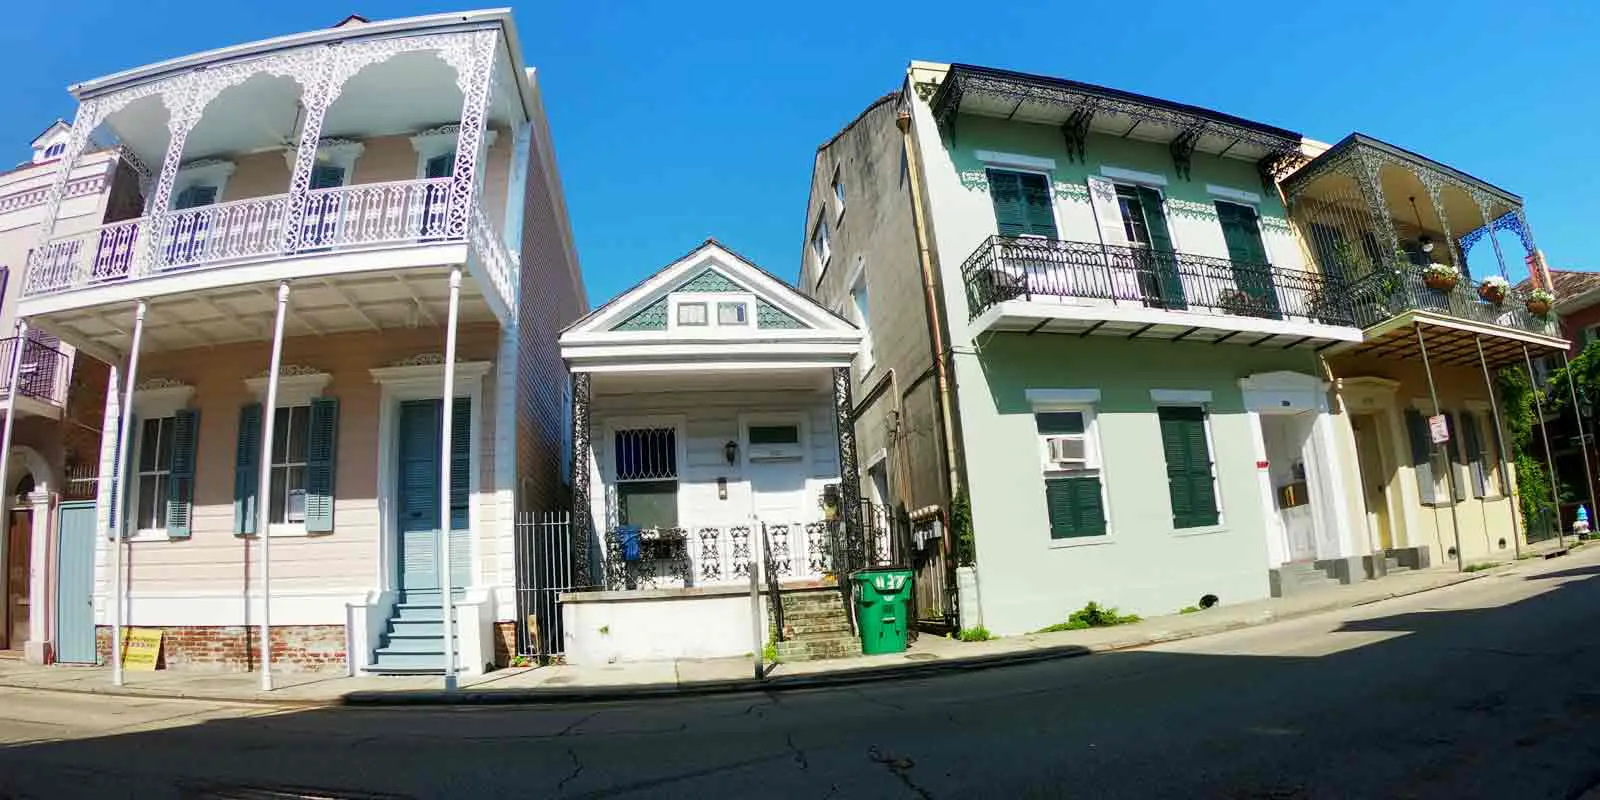 Admire the blend of architectural styles in New Orleans' French Quarter.